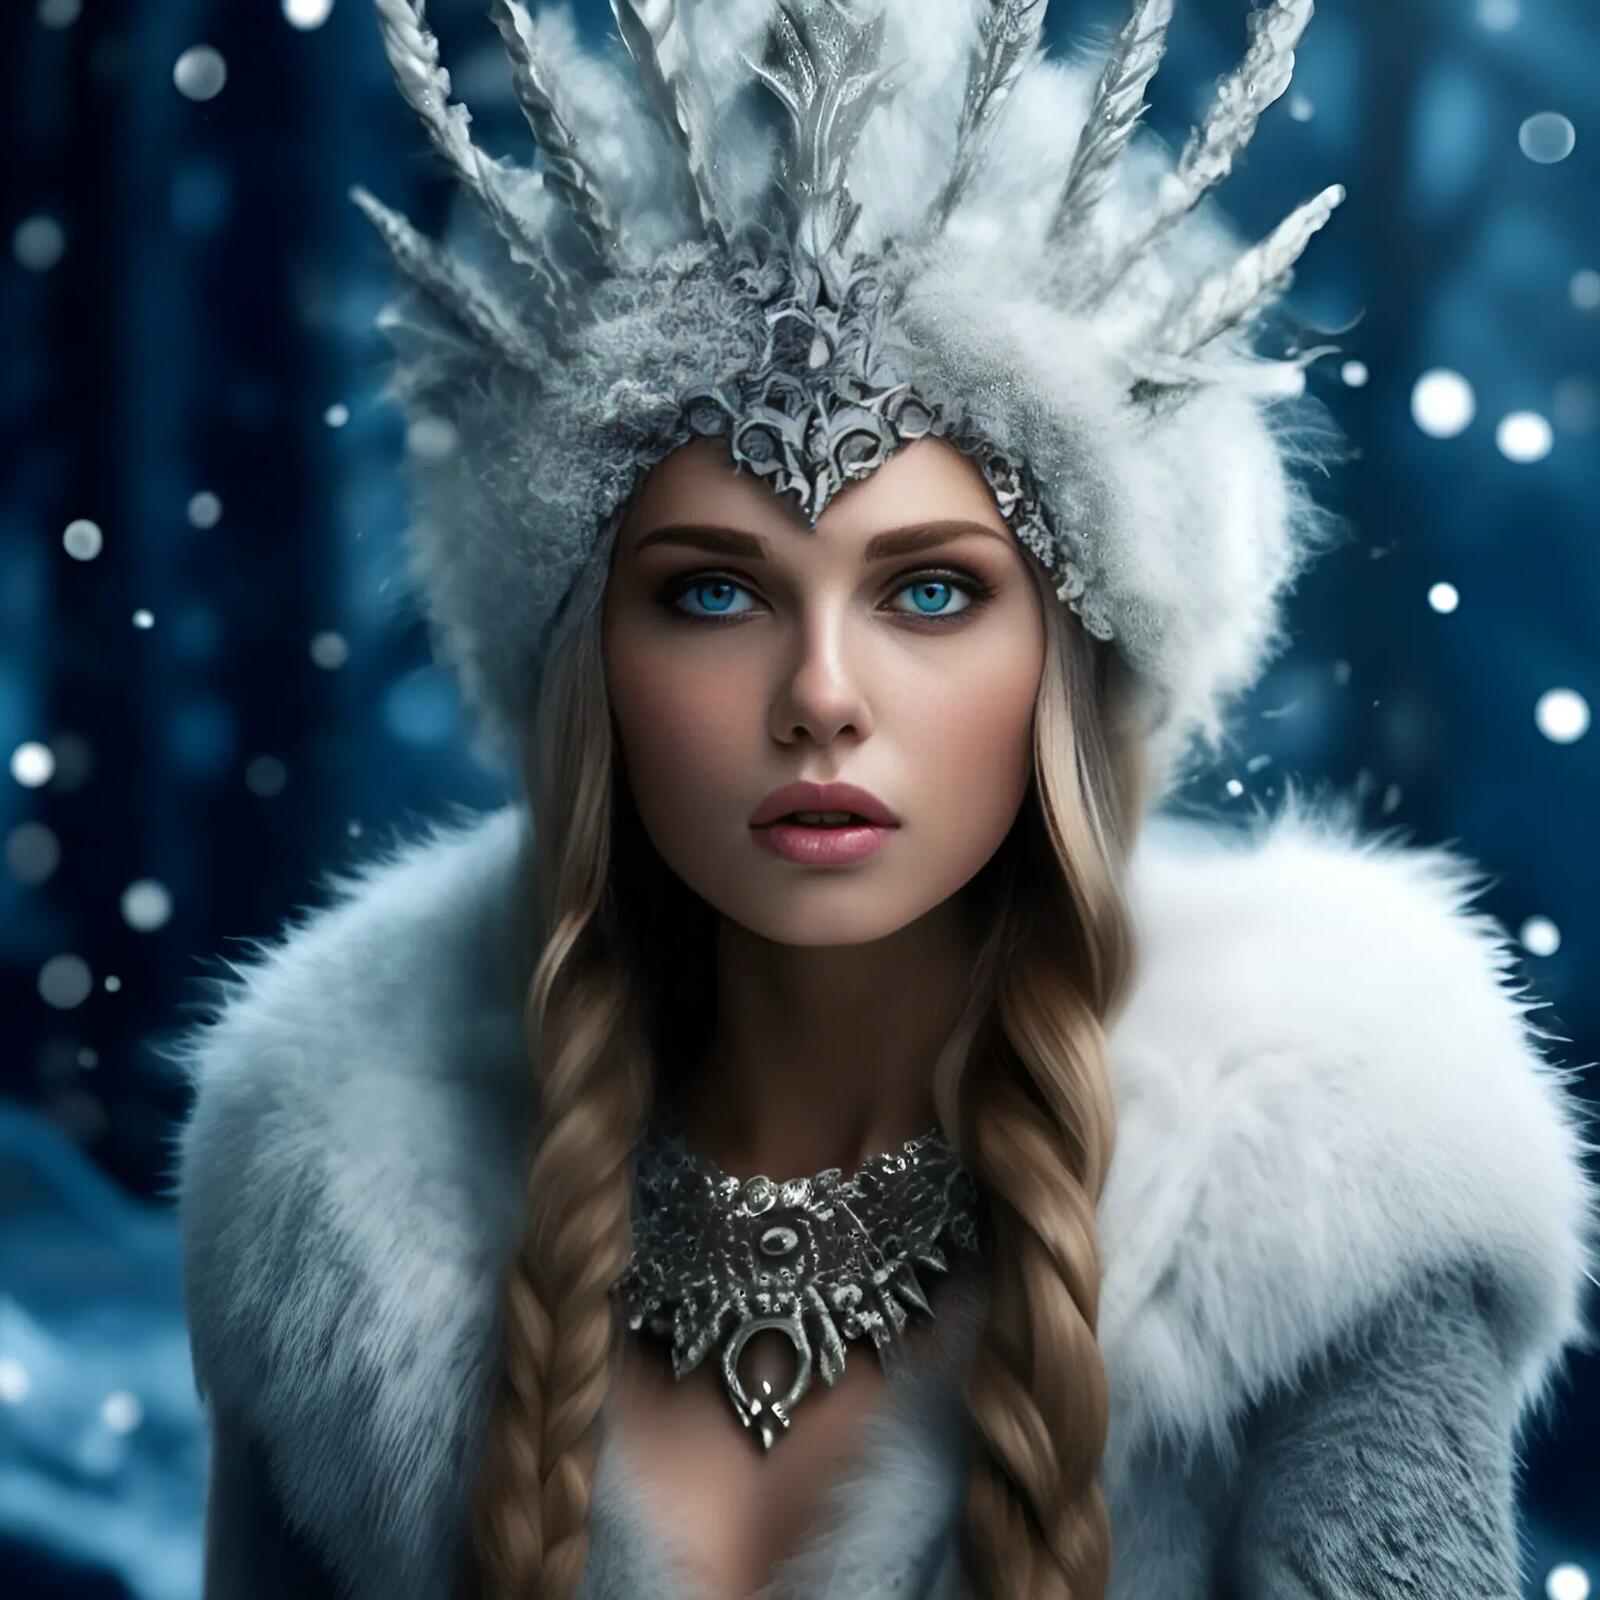 Free photo A snow queen in a winter forest.